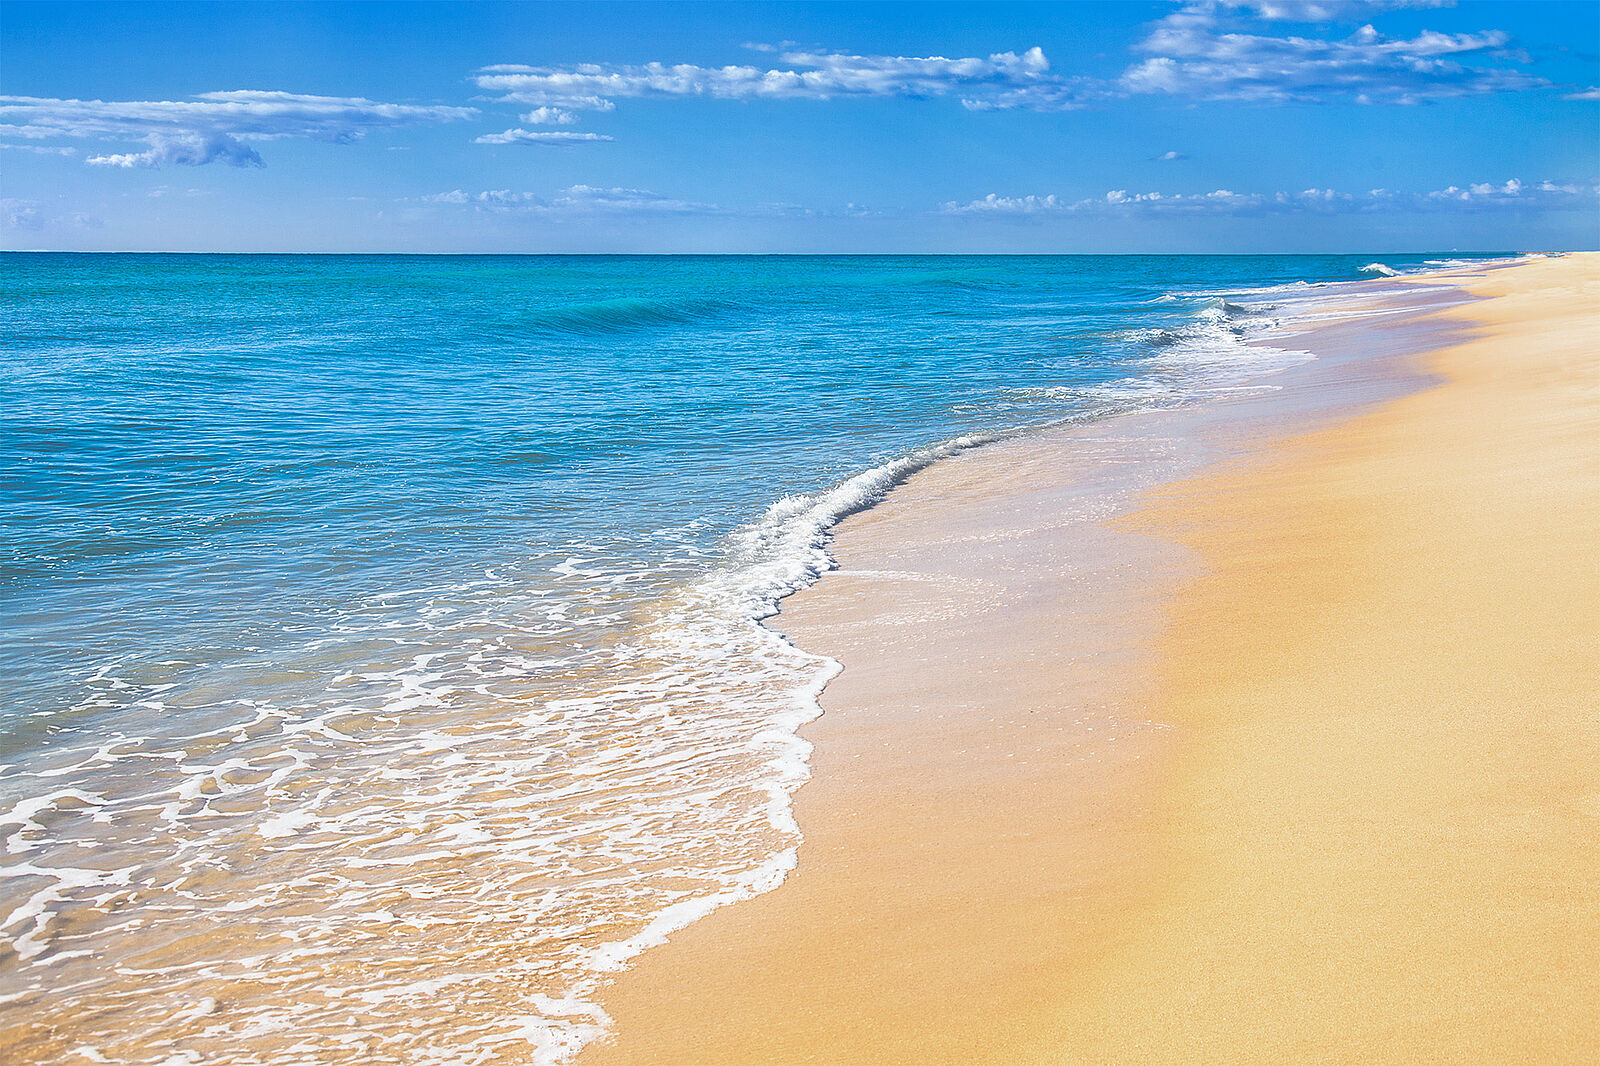 Sunny view of bright blue ocean with gentle waves washing up on a sandy beach.